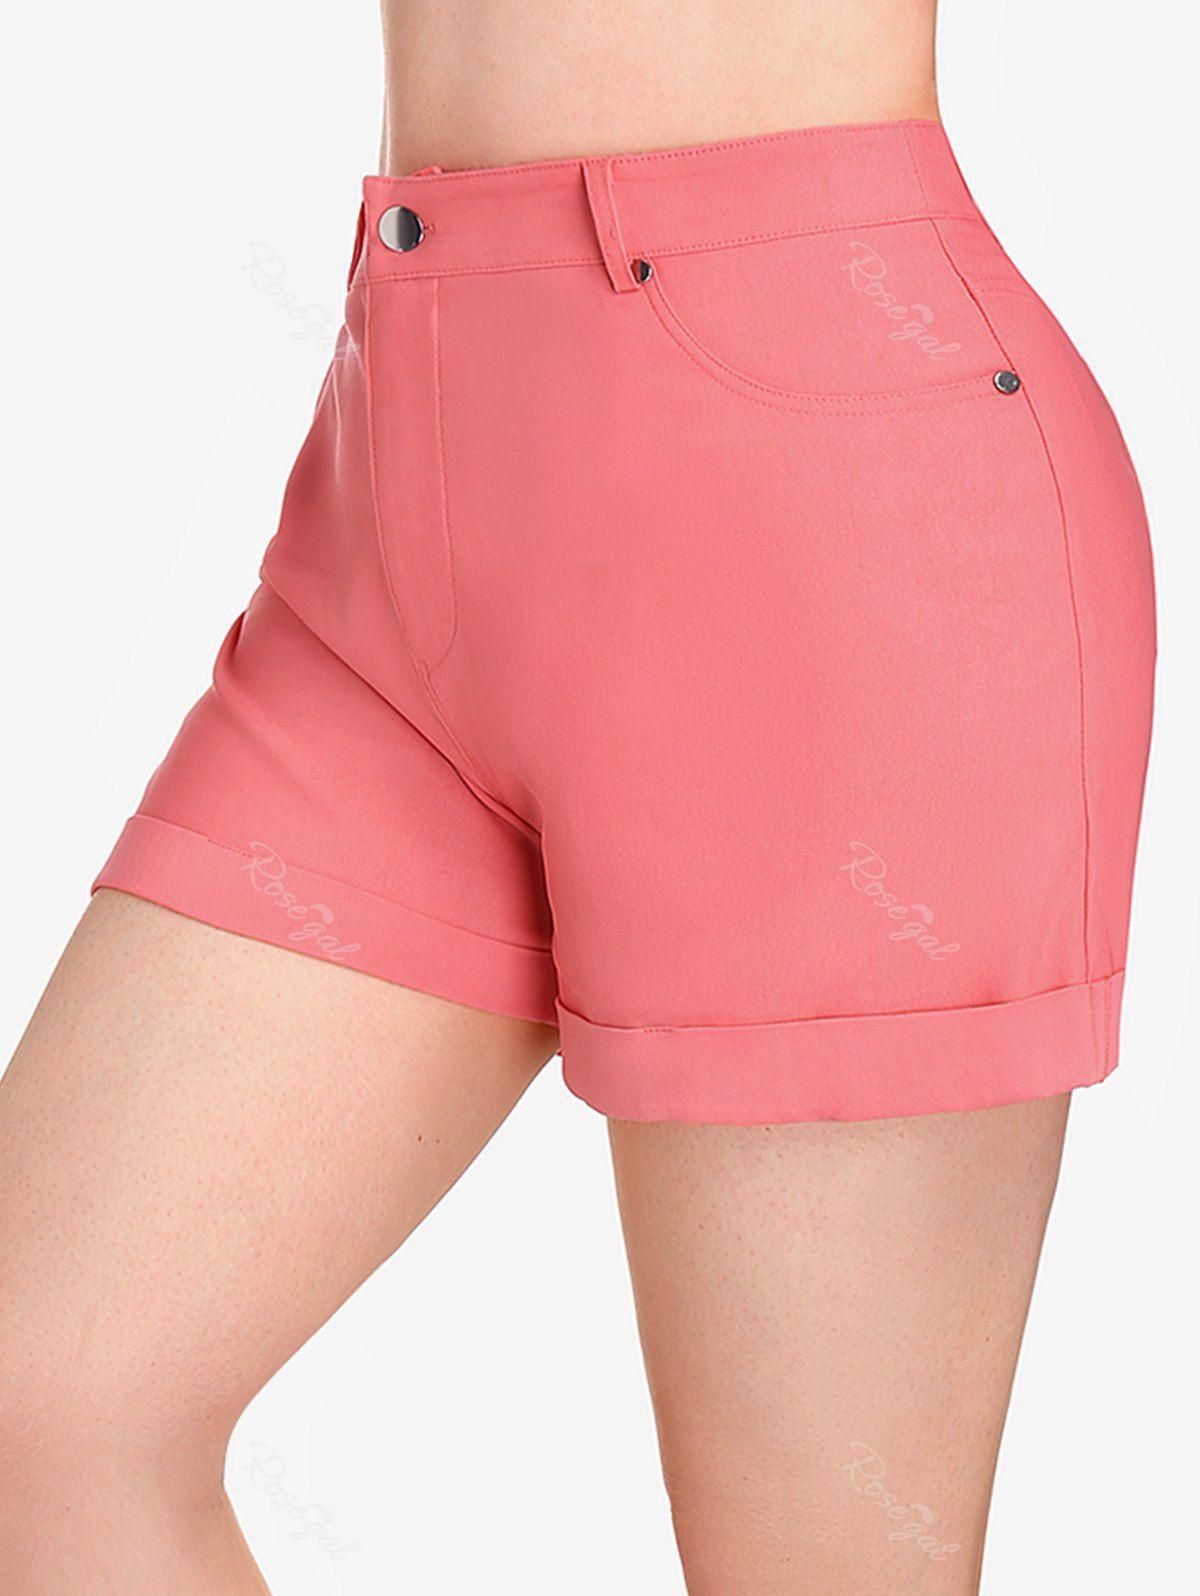 Plus Size Cuffed Colored Shorts with Pockets - 2x | Us 18-20